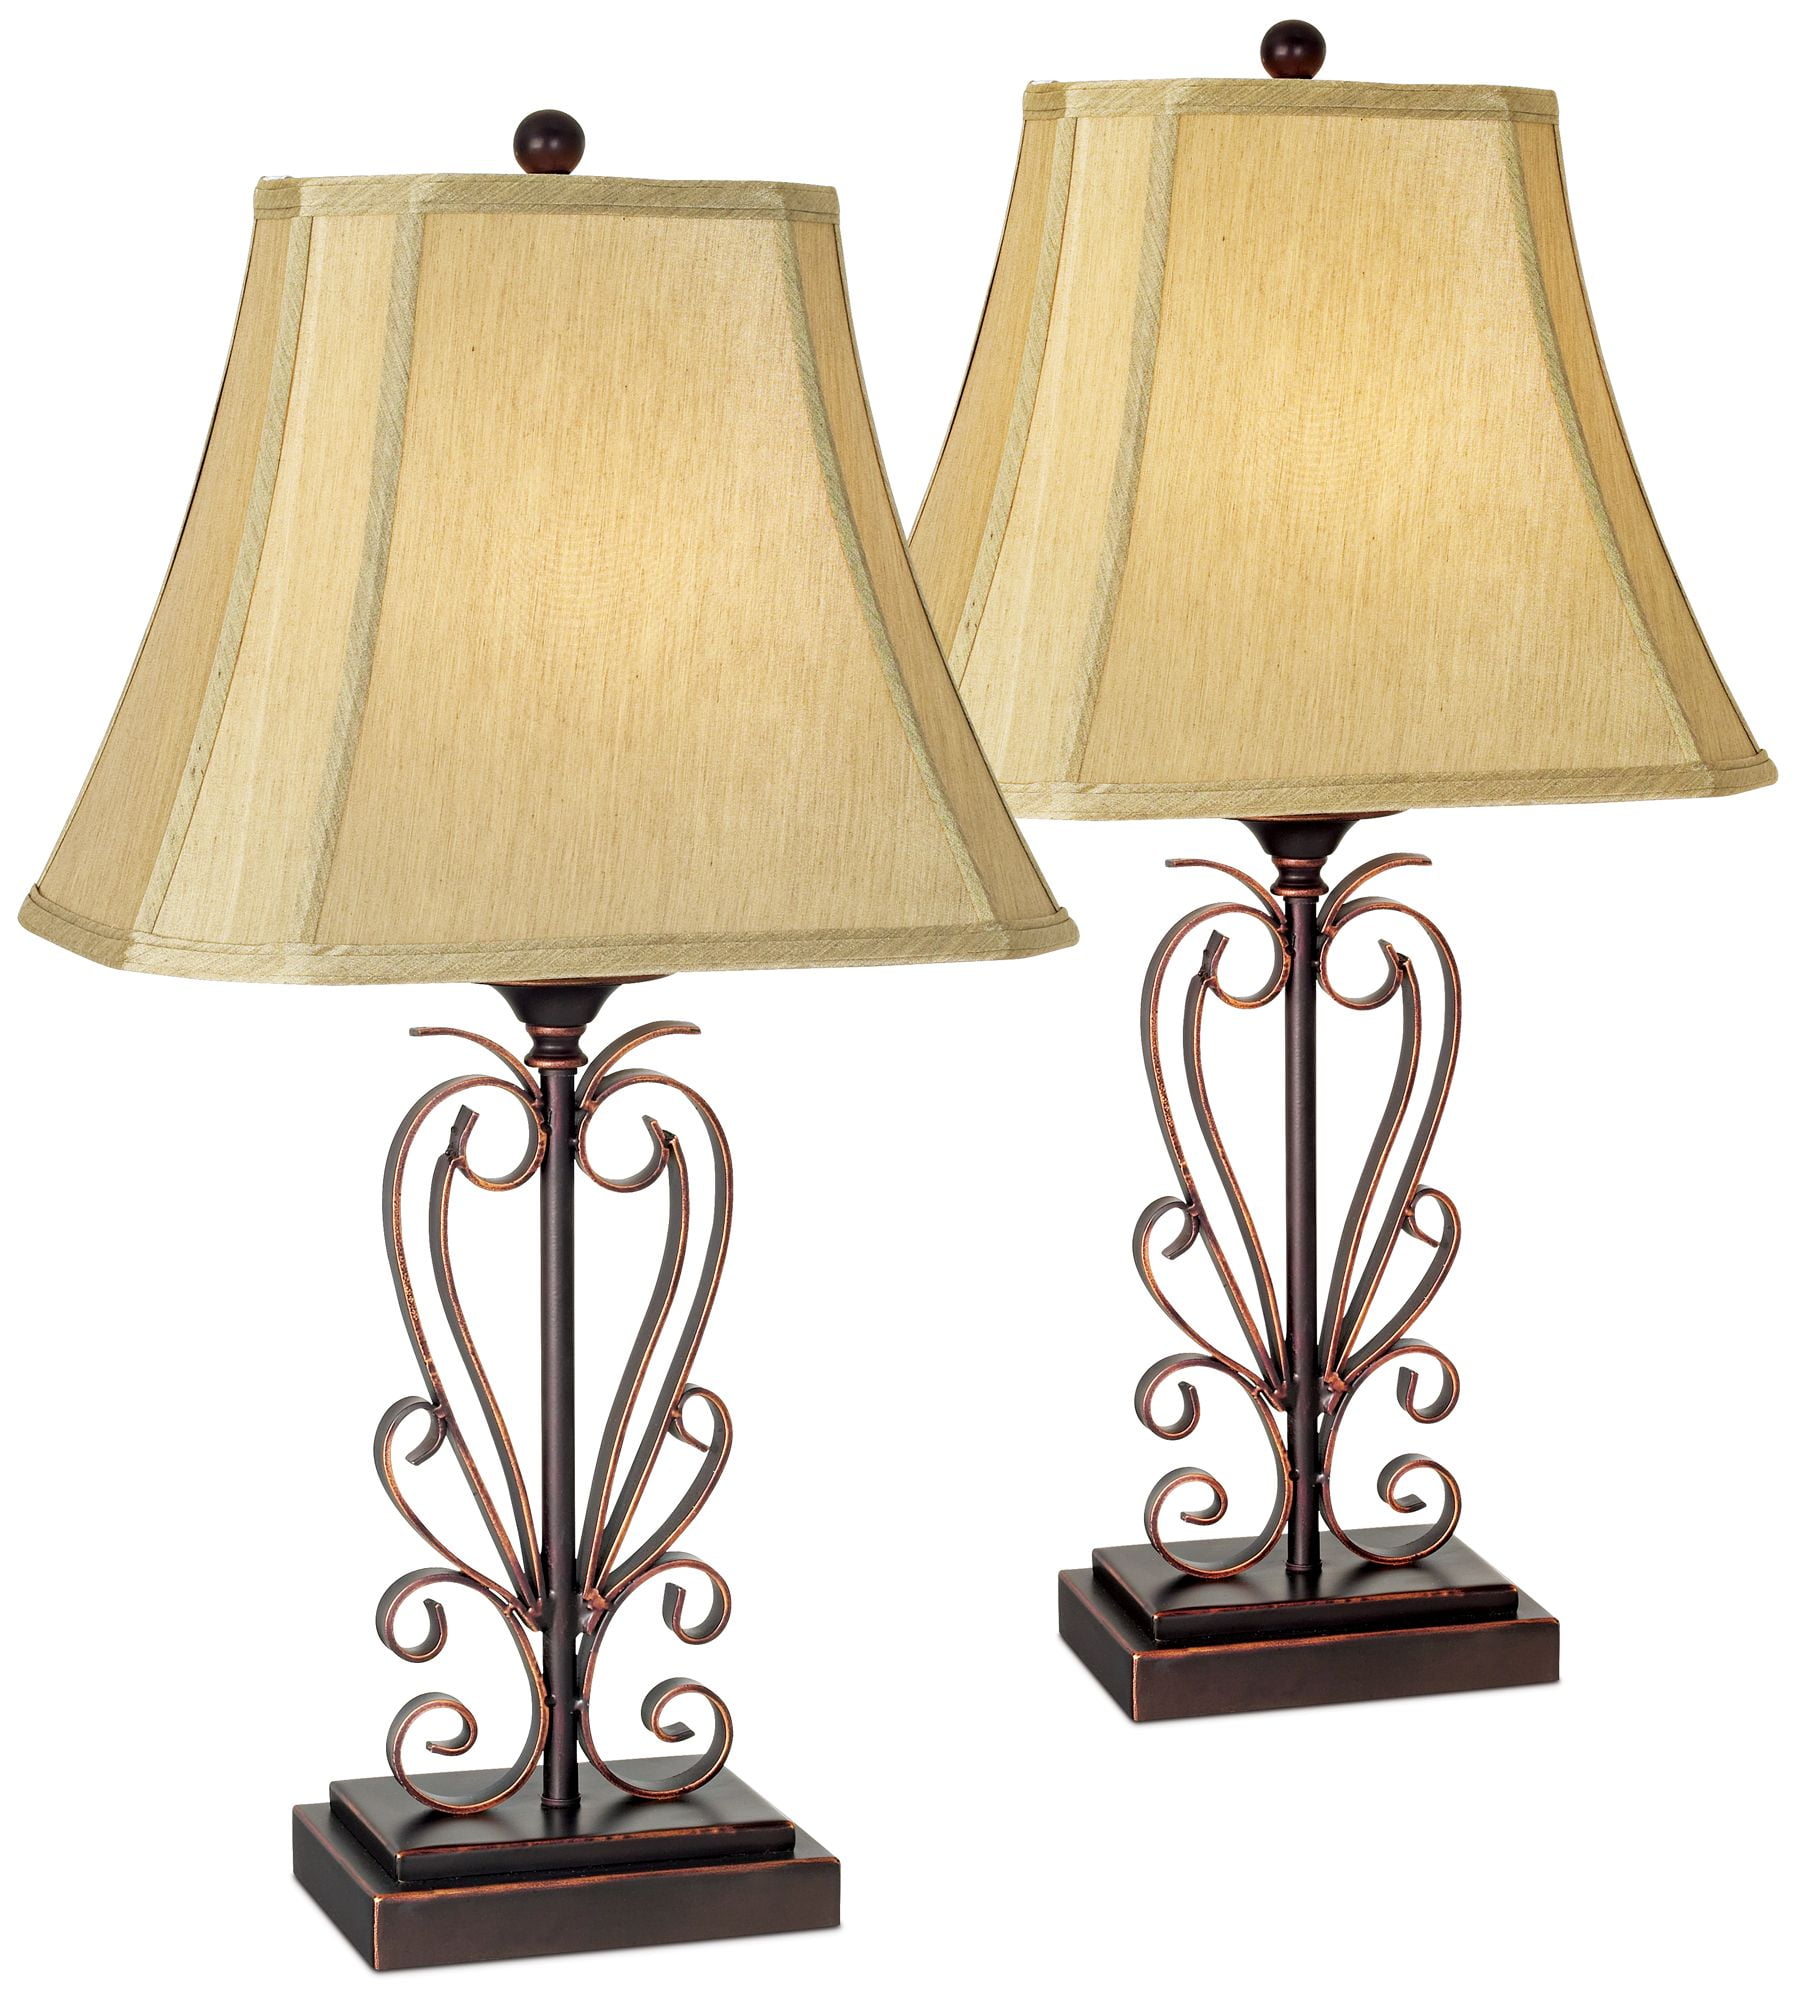 Franklin Iron Works Traditional Table Lamps Set of 2 with Table Top